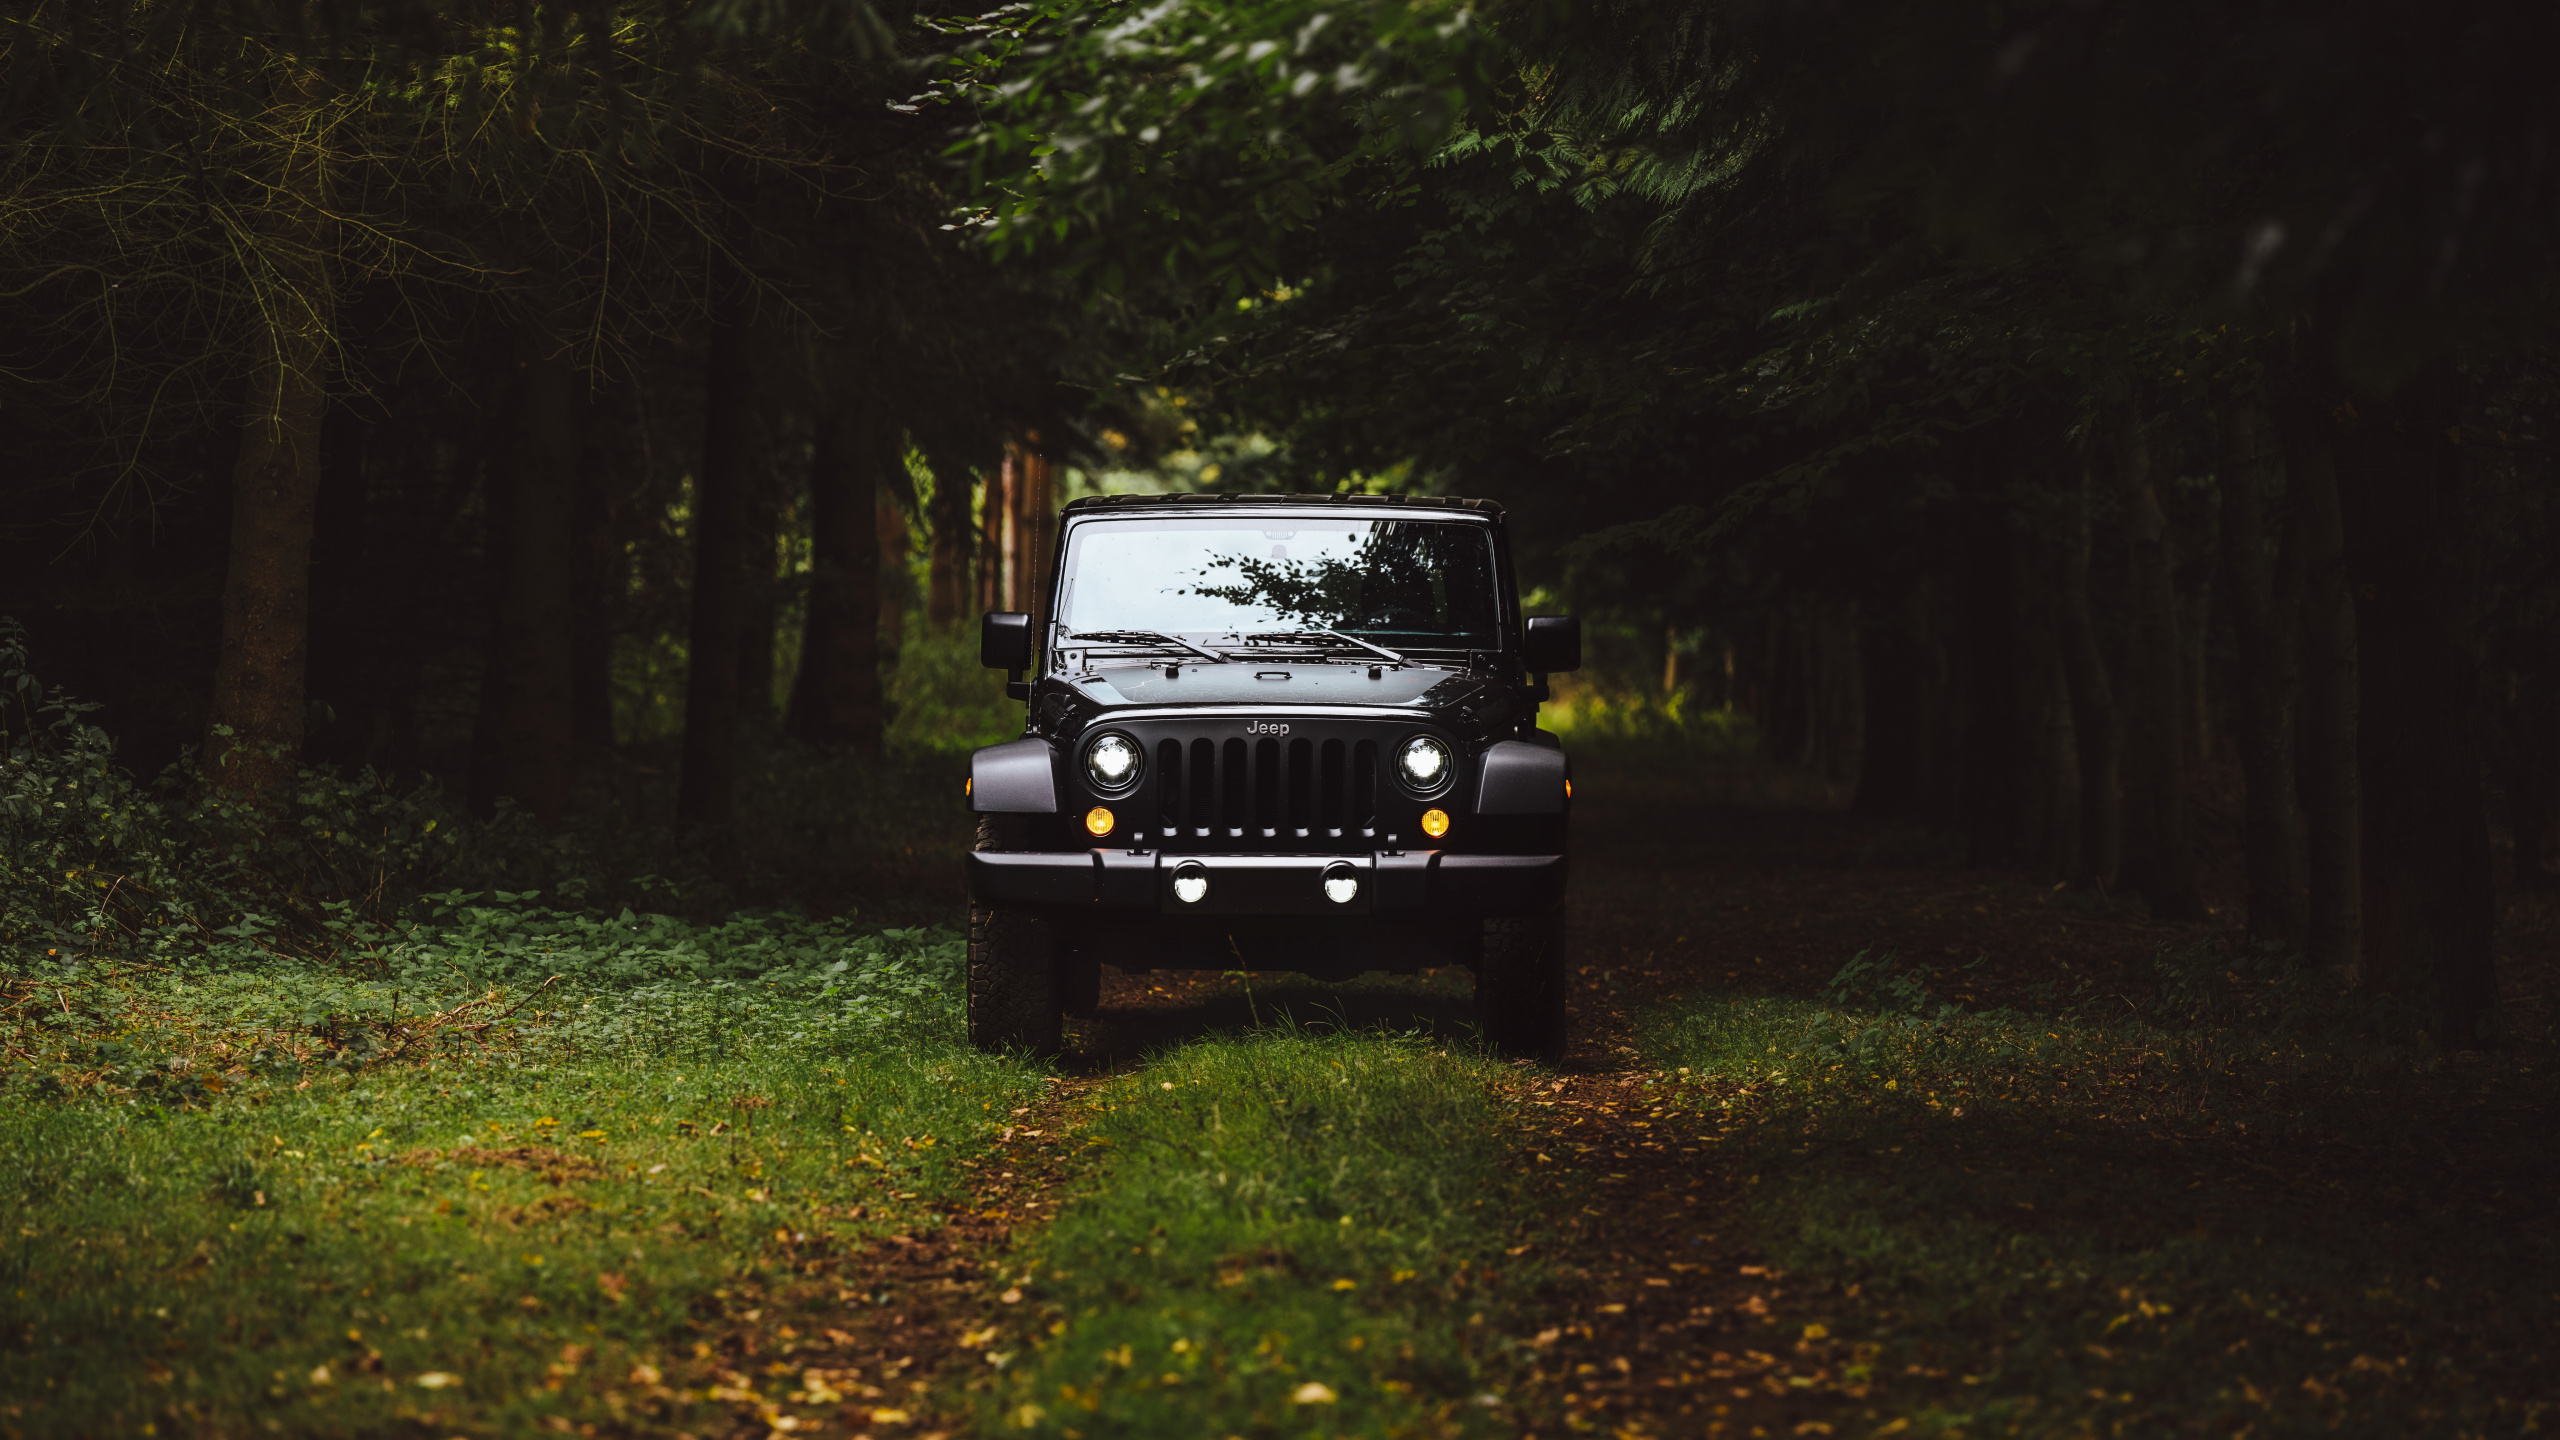 Black Jeep Wrangler on Green Grass Field Surrounded by Green Trees During Daytime. Wallpaper in 2560x1440 Resolution